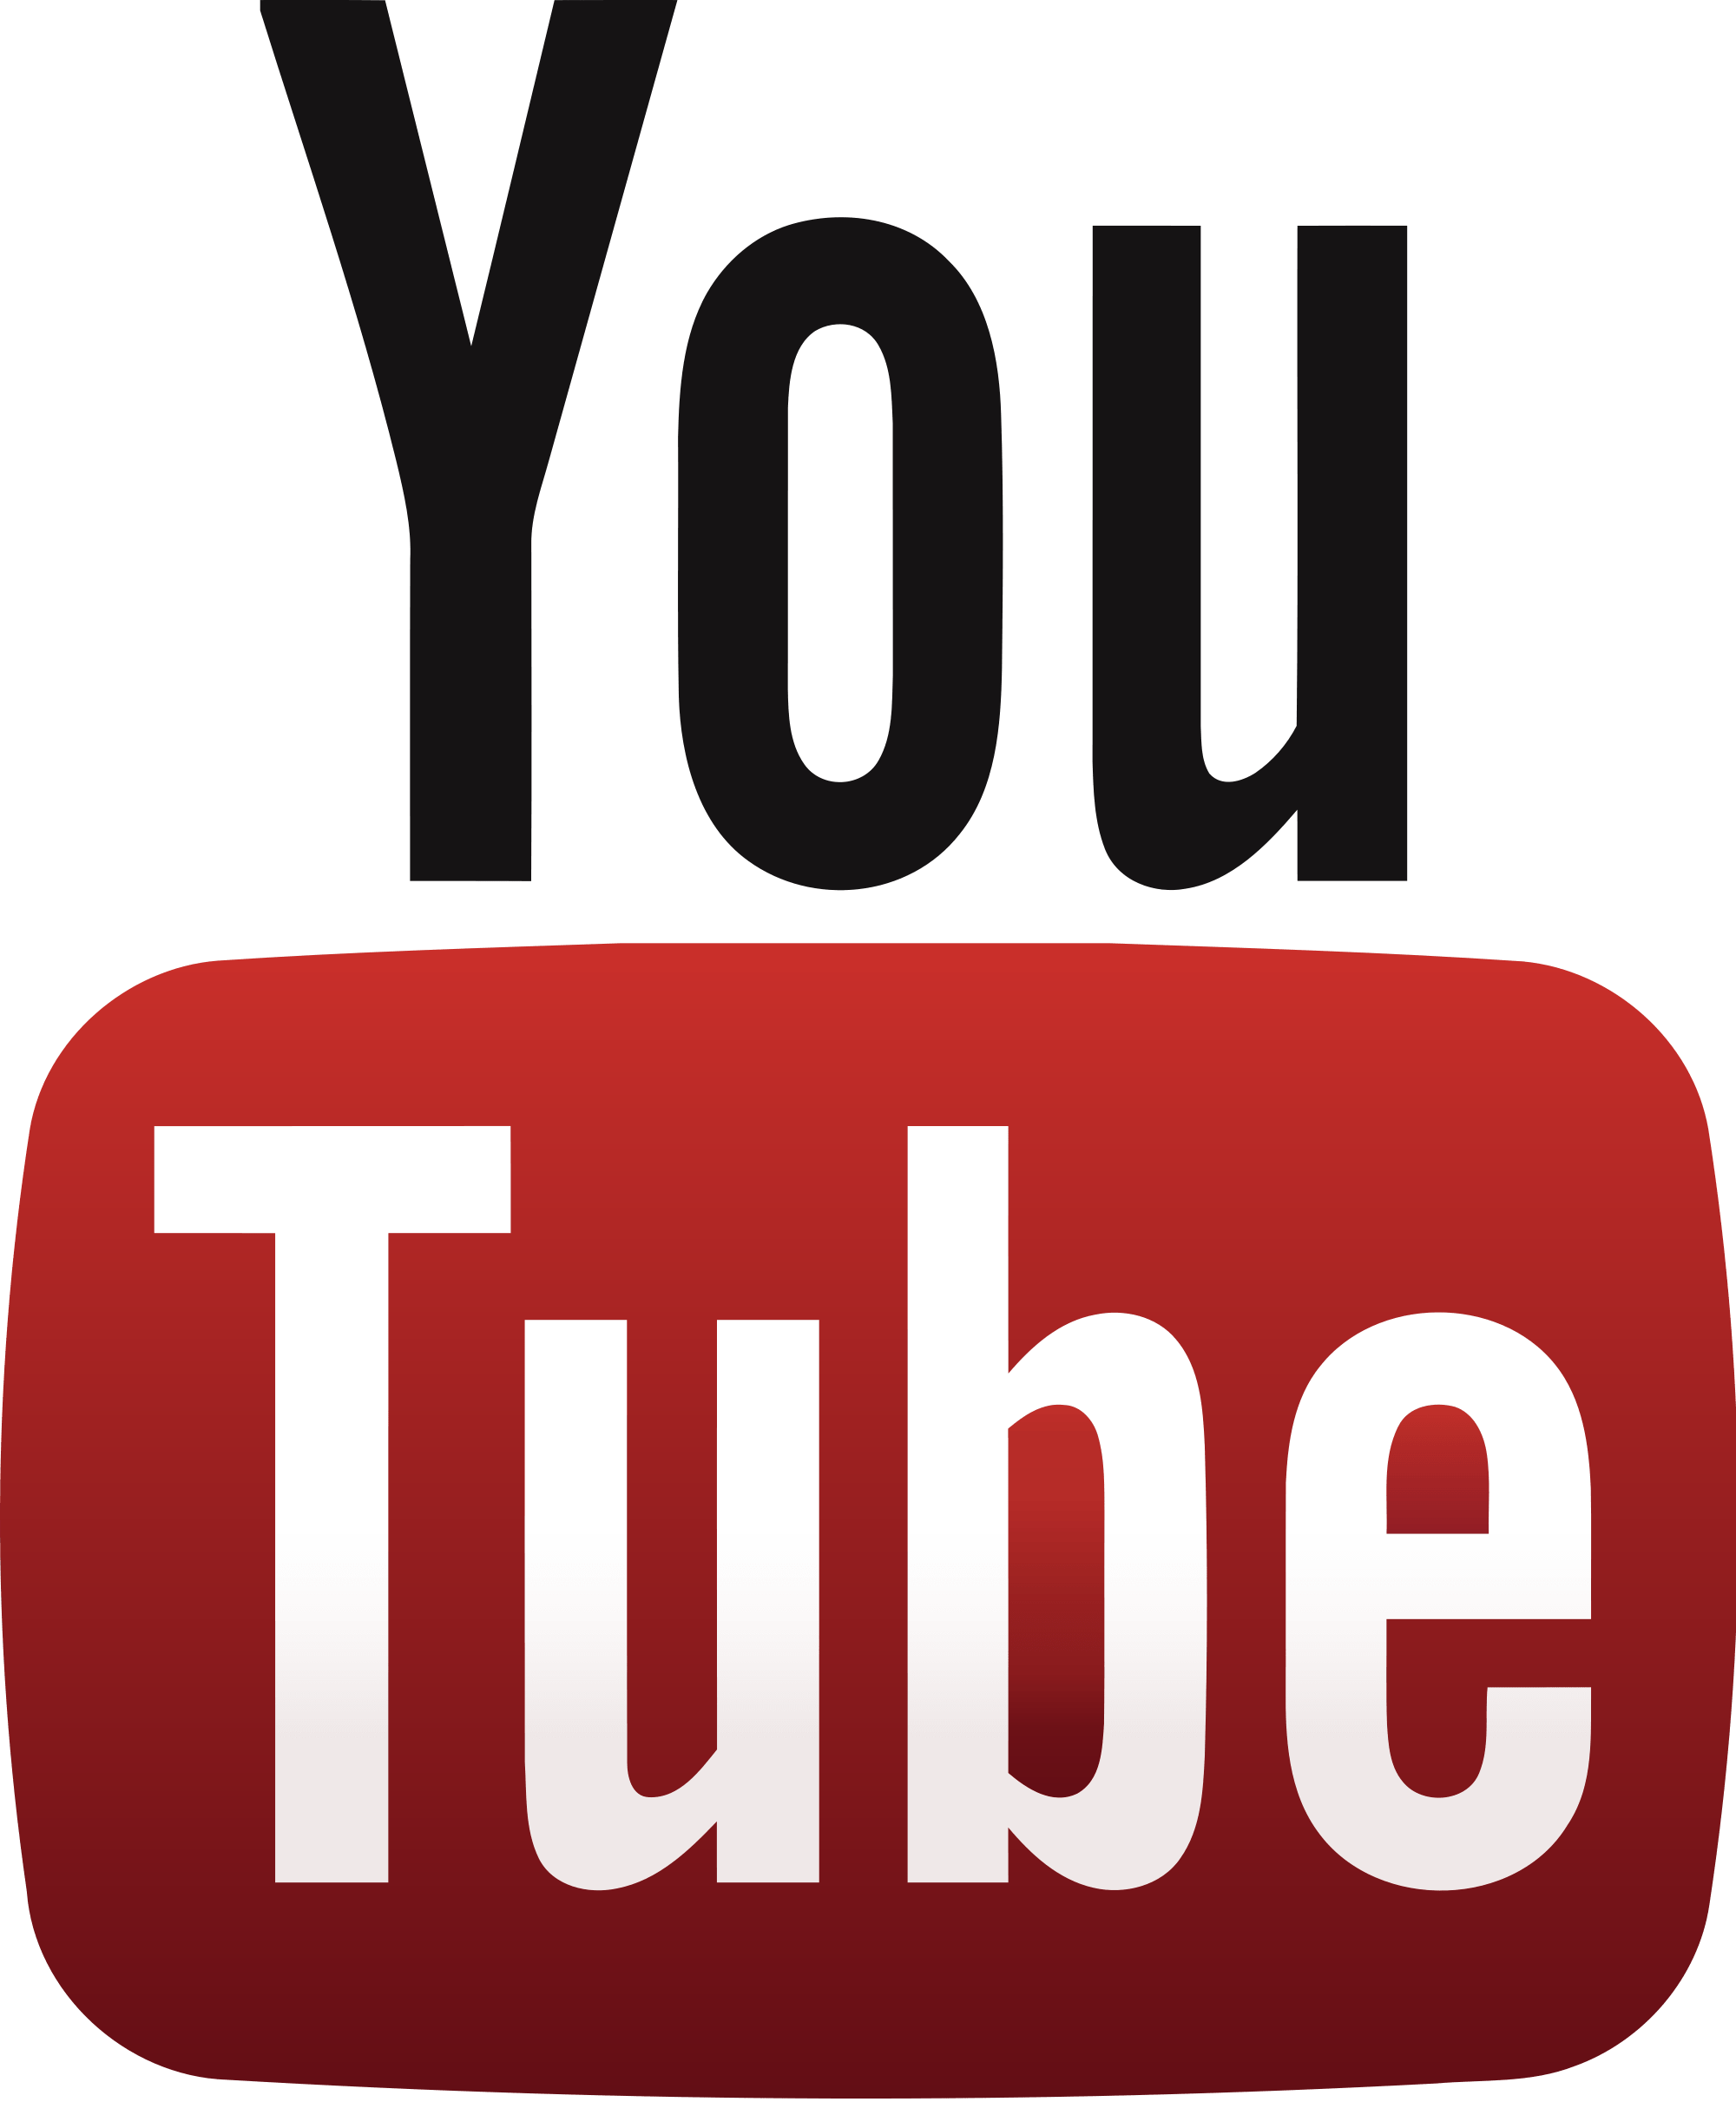 YouTube Logo - Youtube Logo Transparent PNG Pictures - Free Icons and PNG Backgrounds